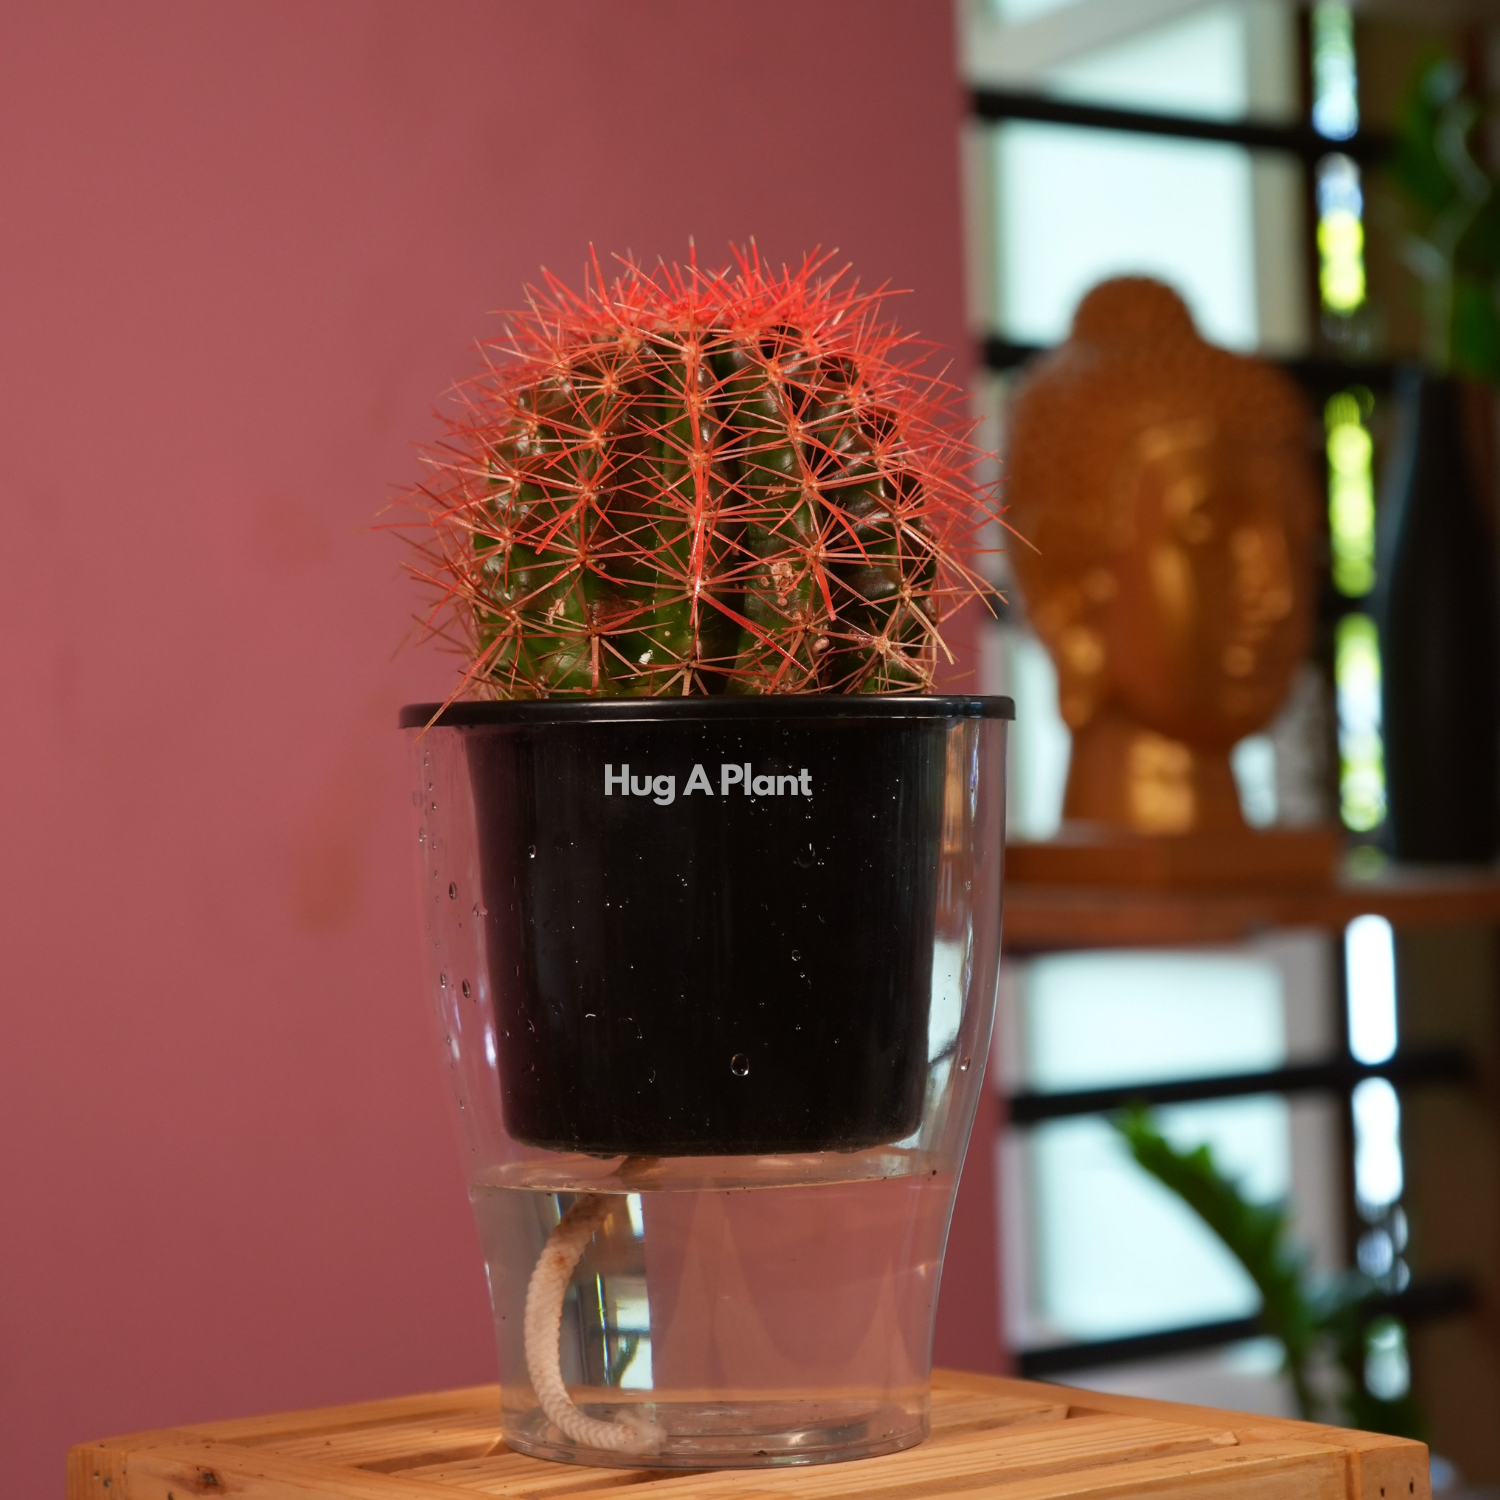 Ball Cactus Red (Parodia magnifica) - Live Plant (With 5 Inch Self-Watering Pot & Plant)